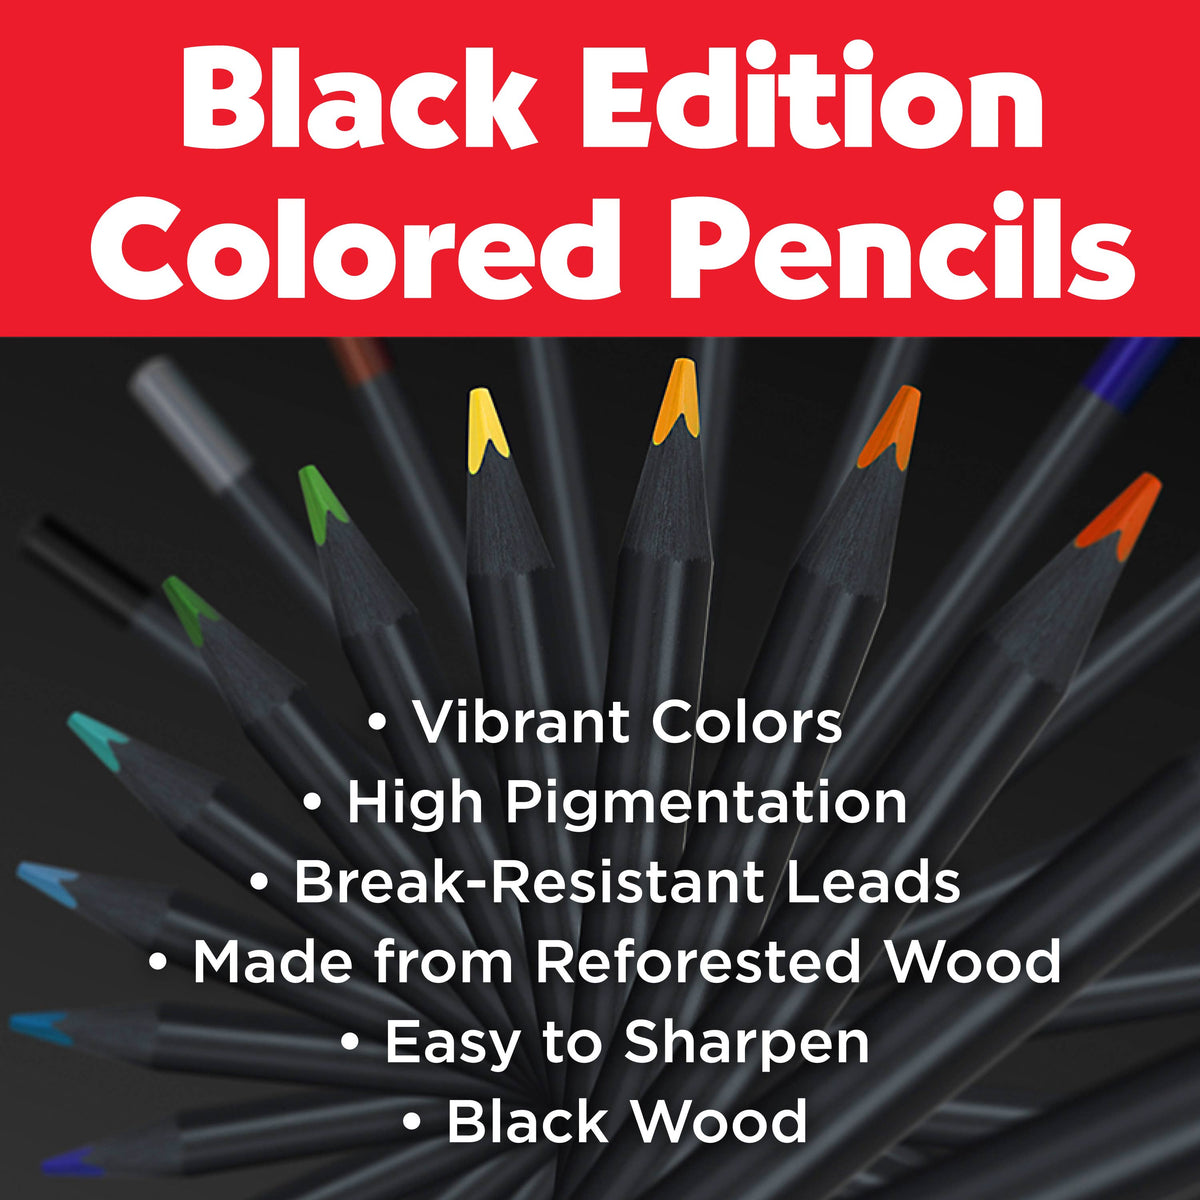 Black Edition Colored Pencils - Tin of 12